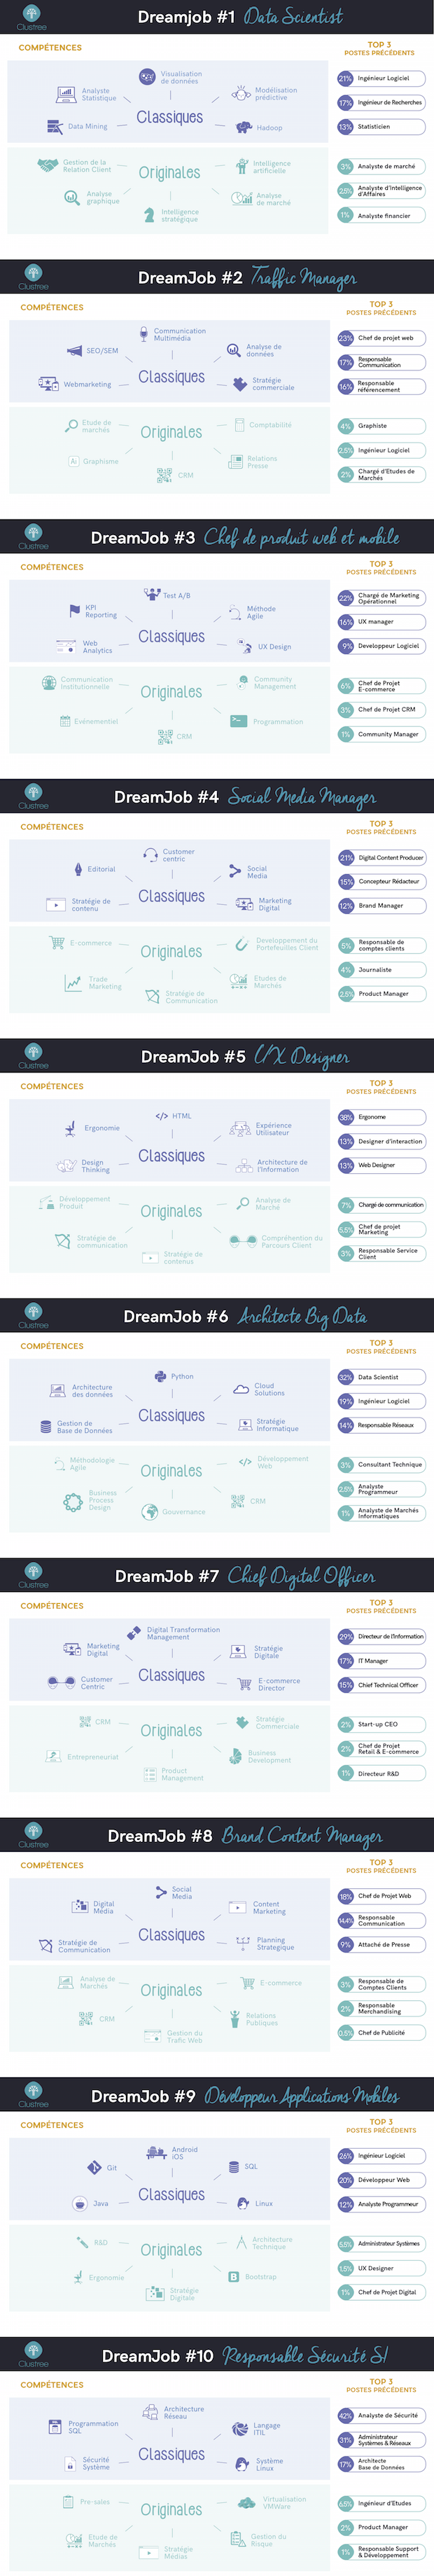 clustree_Infographie_dreamjobs